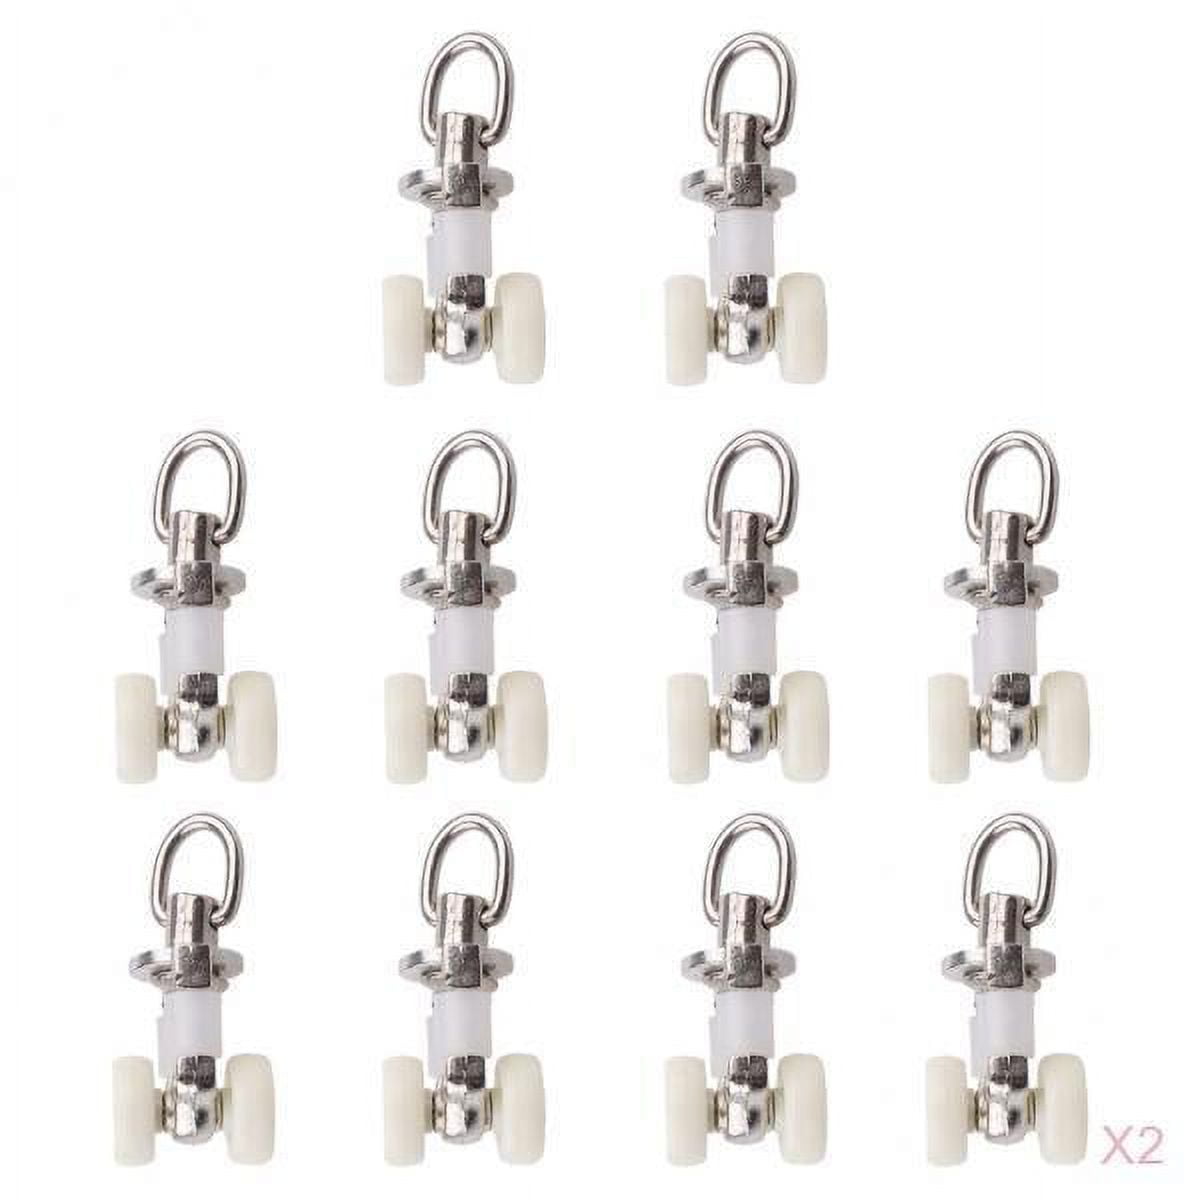 Curtain Tracks Accessories (10 Pack Curtain Track Roller Hooks)